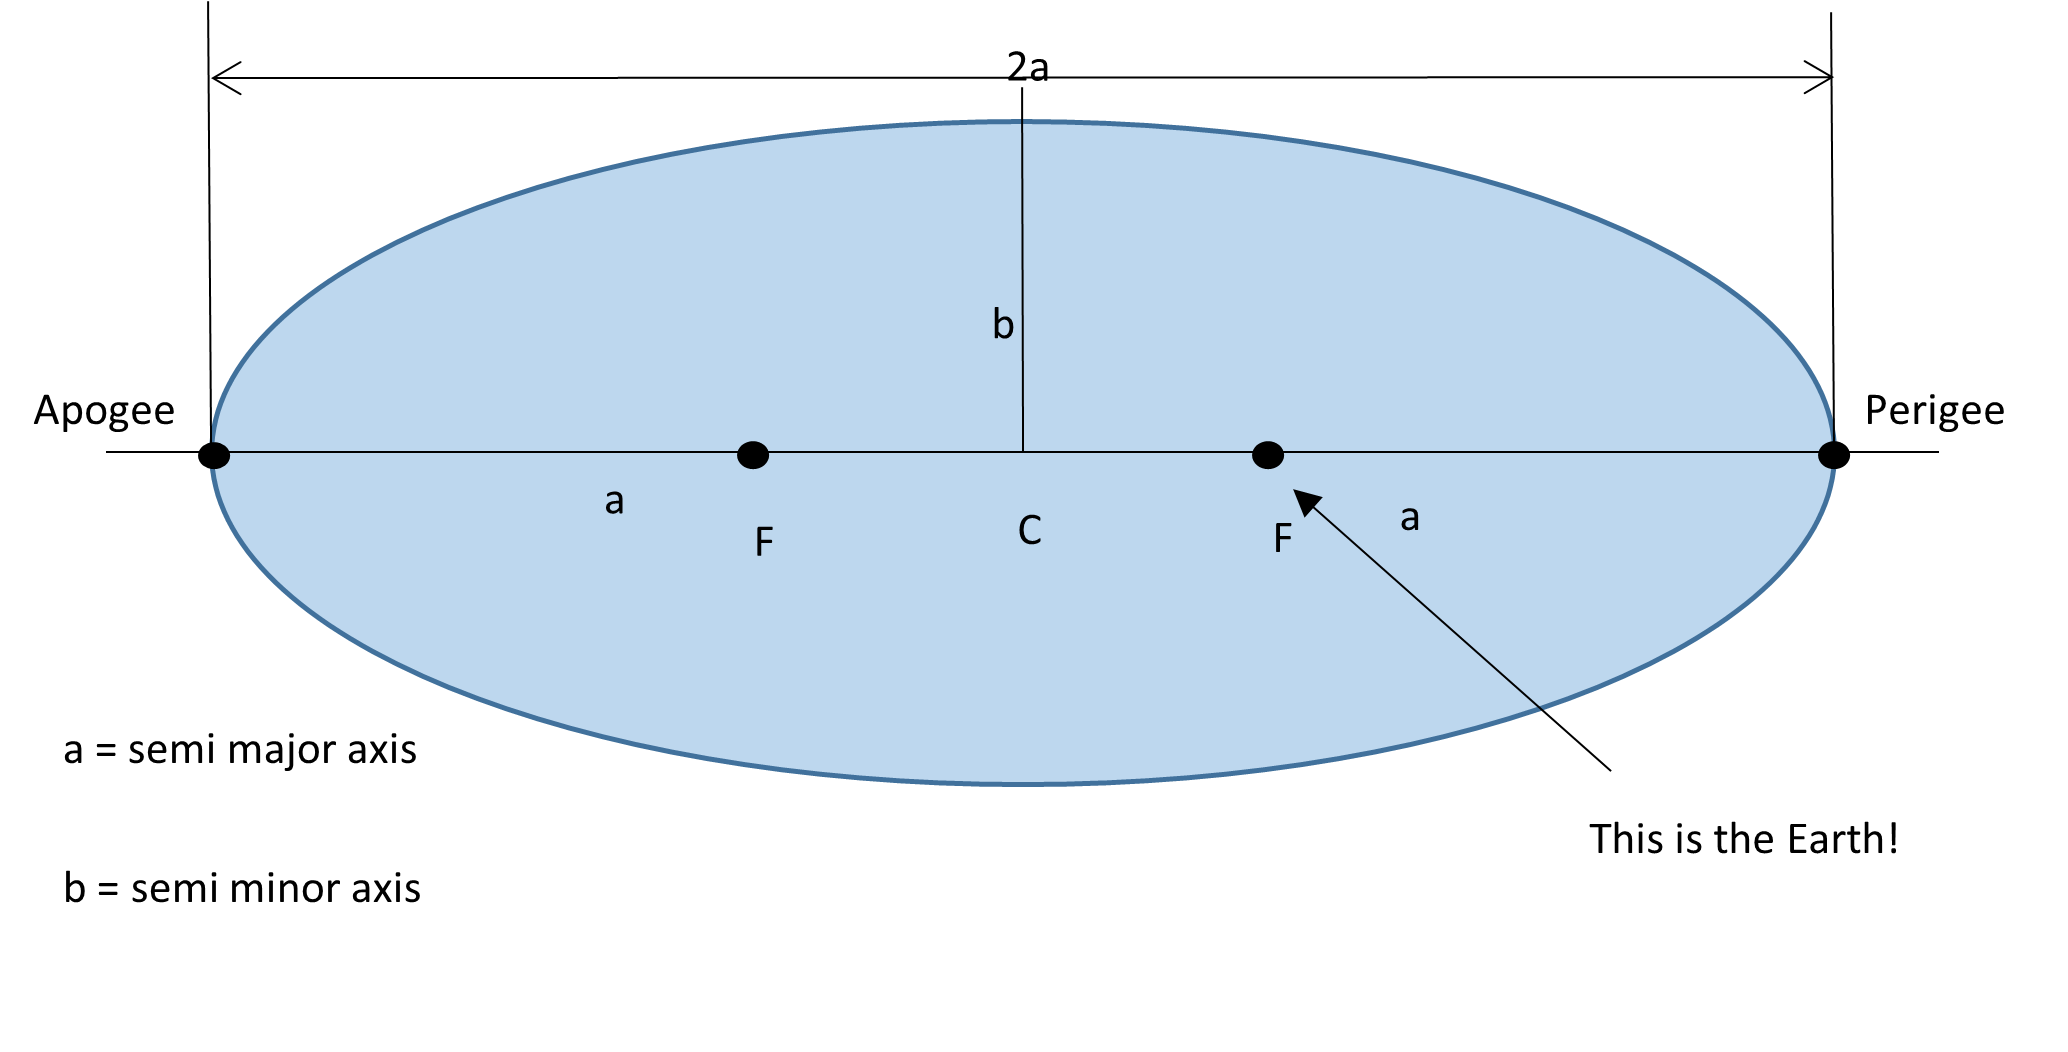 Diagram of The fundamentals of elliptical orbits with a dot representing earth